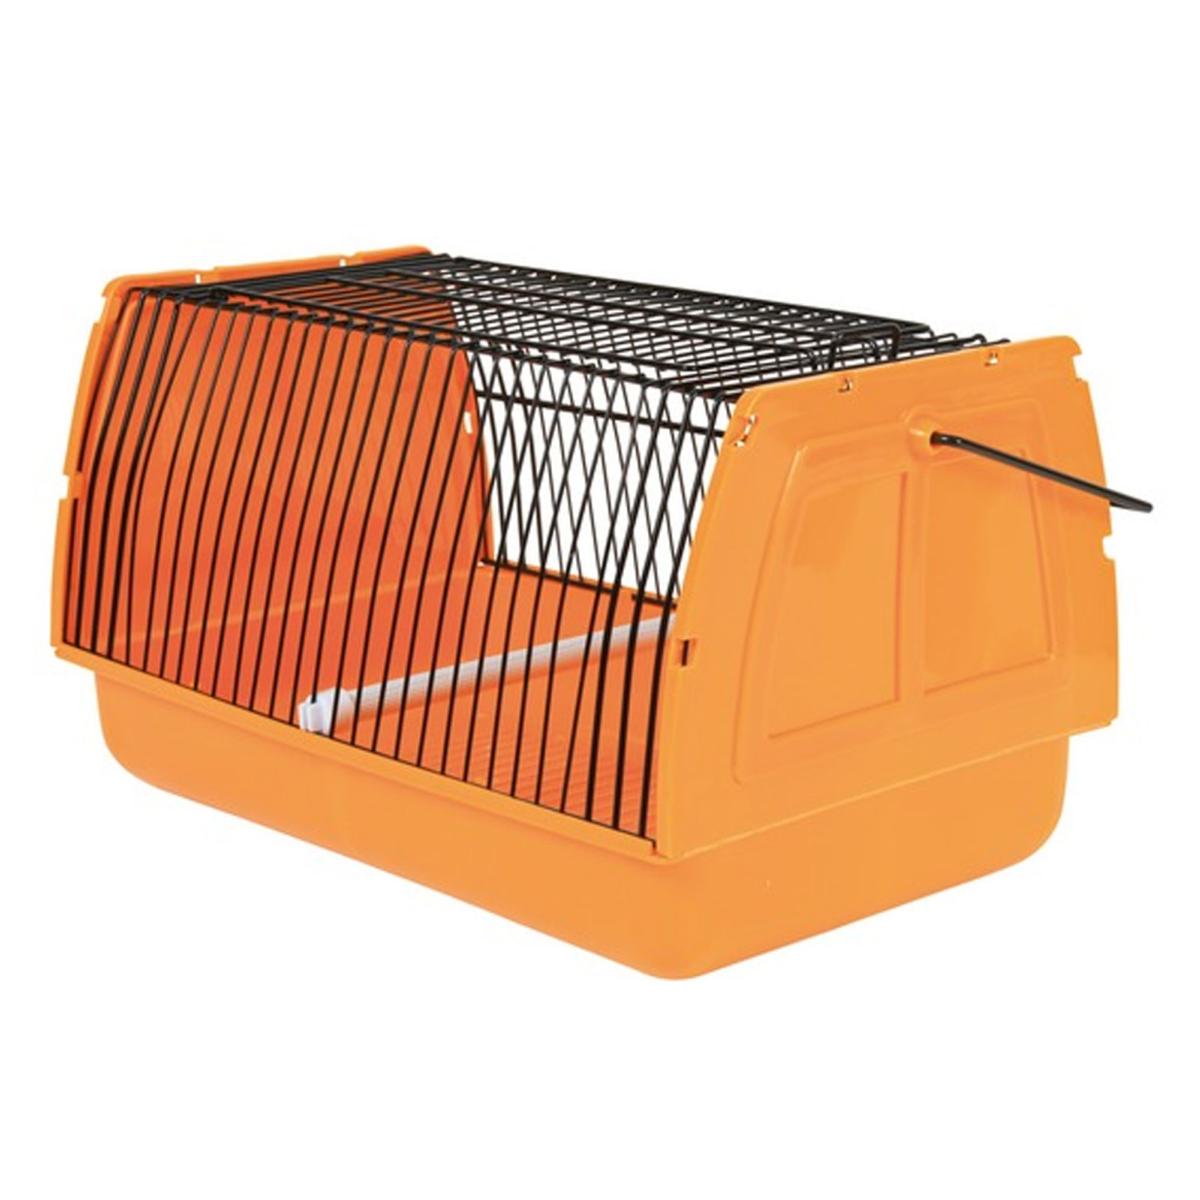 Trixie Transport Box For Small Birds And Small Animals 